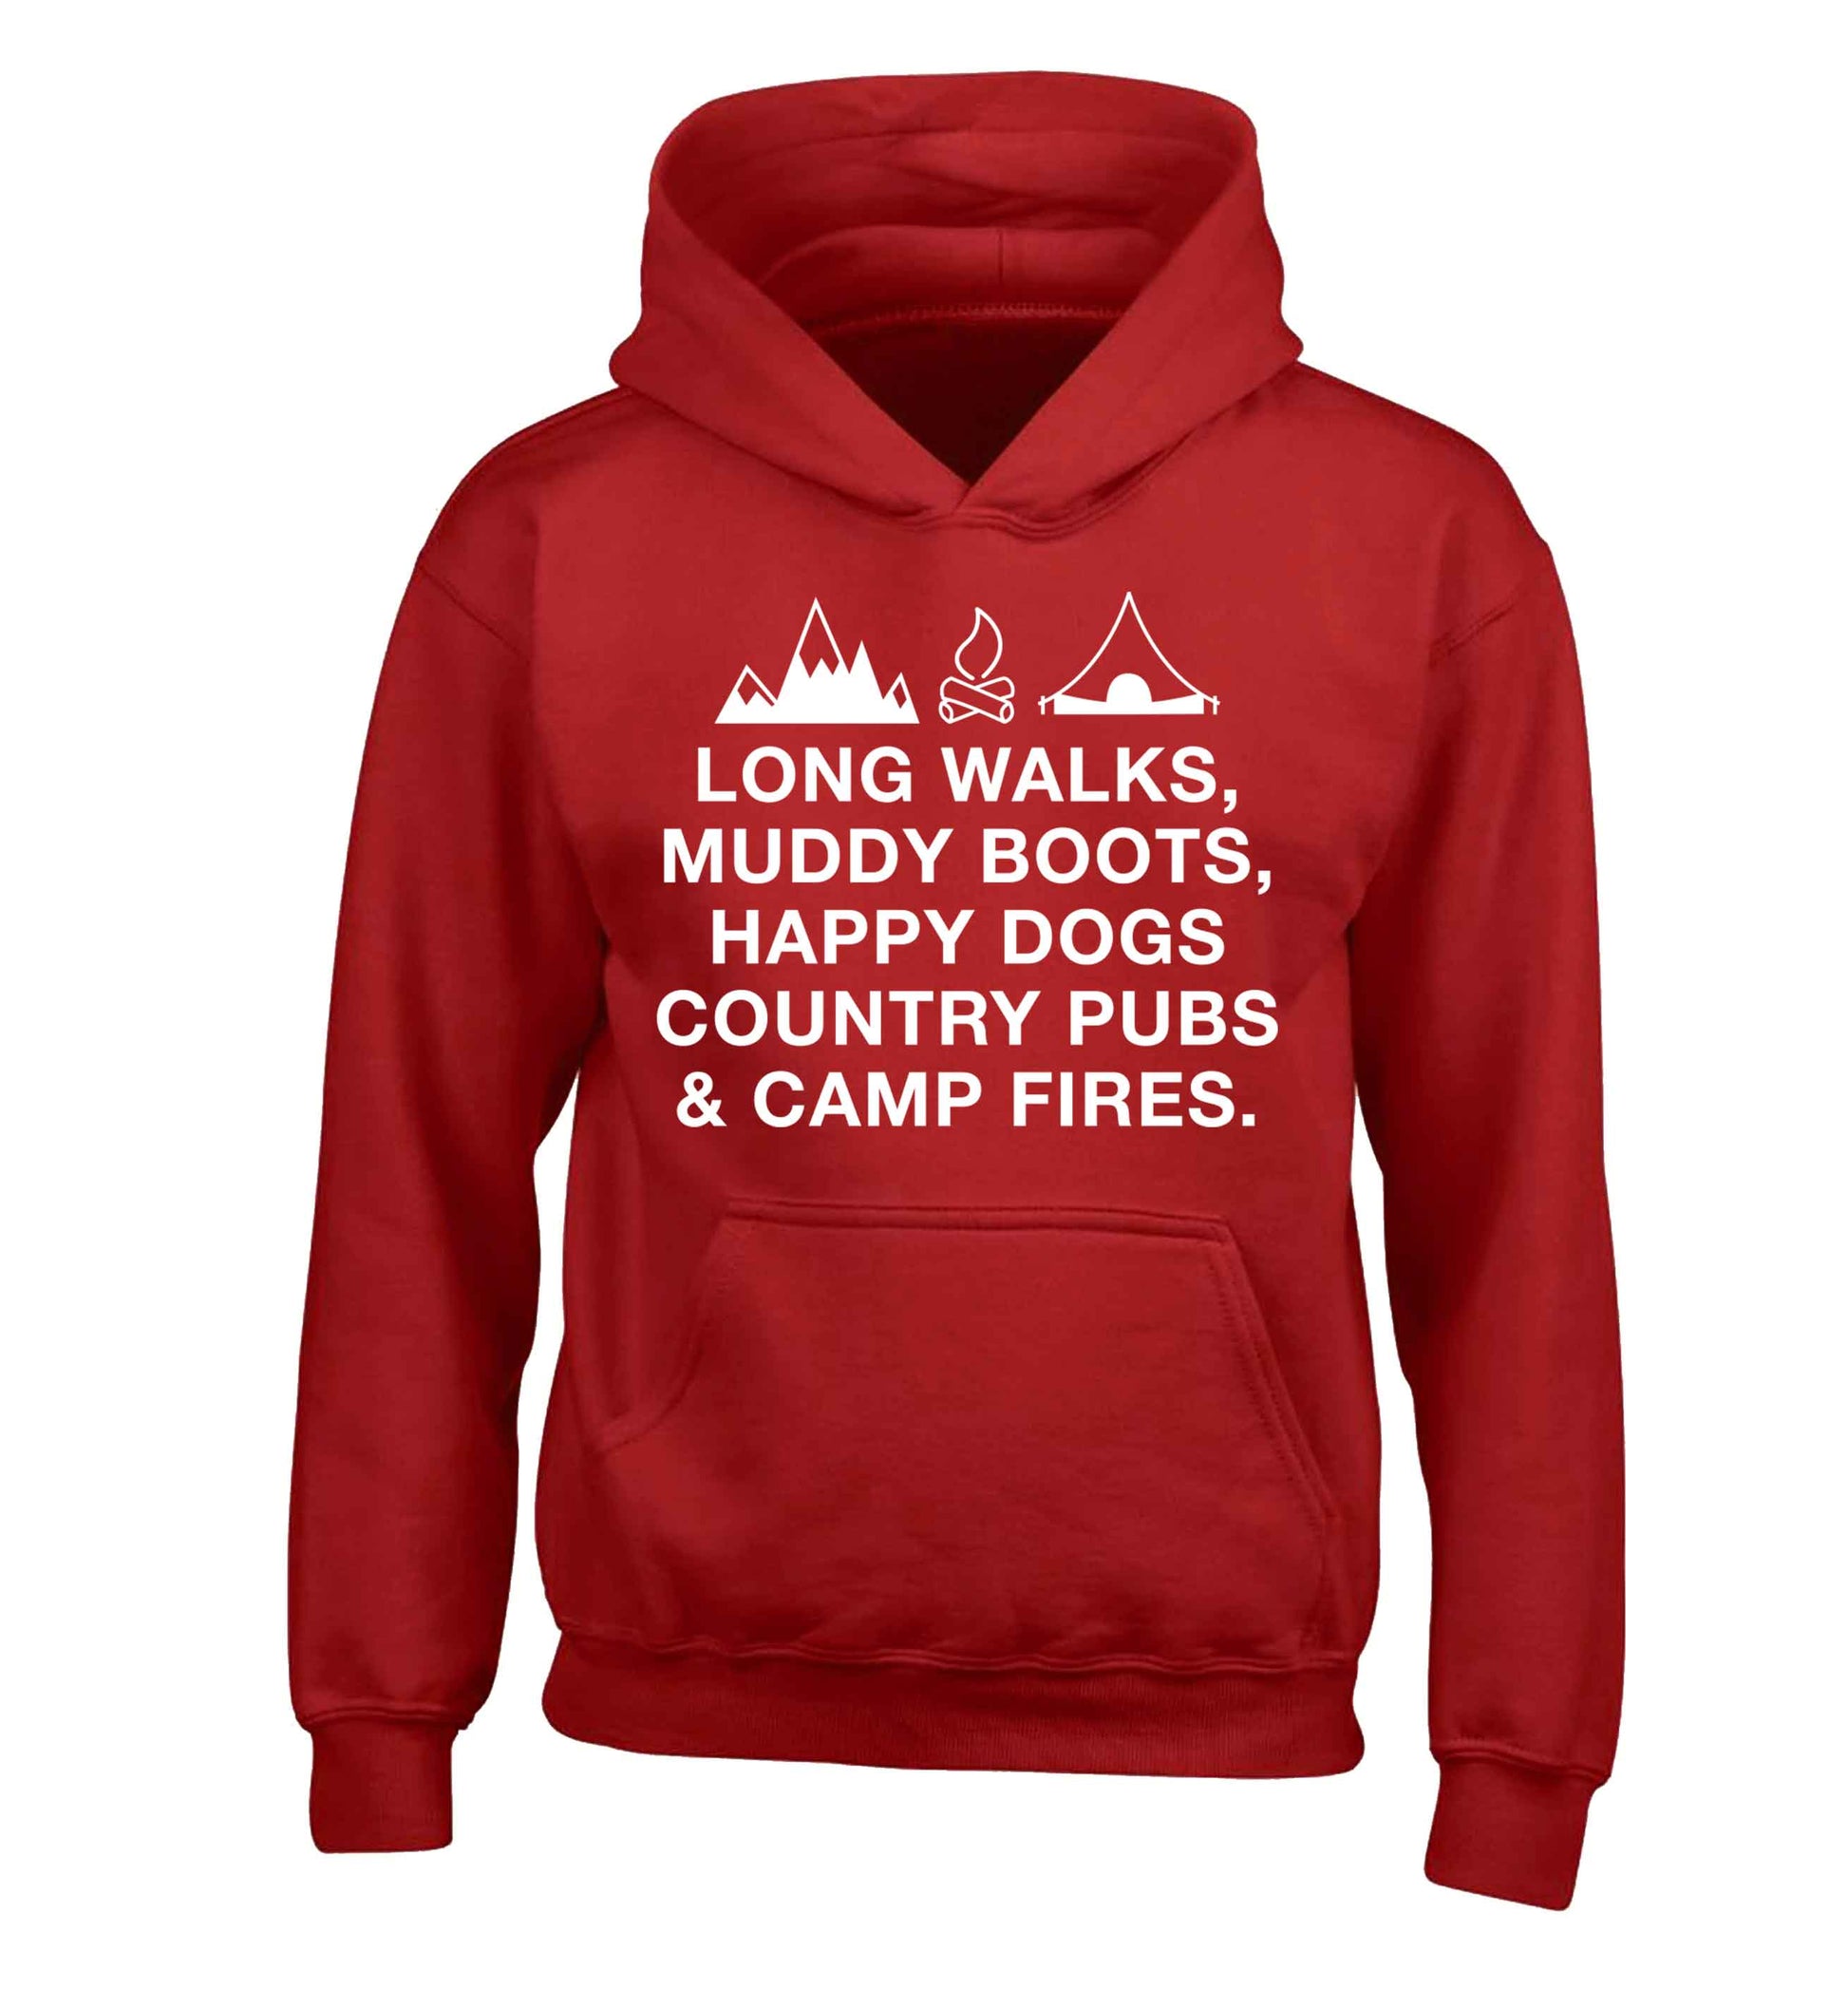 Long walks muddy boots happy dogs country pubs and camp fires children's red hoodie 12-13 Years